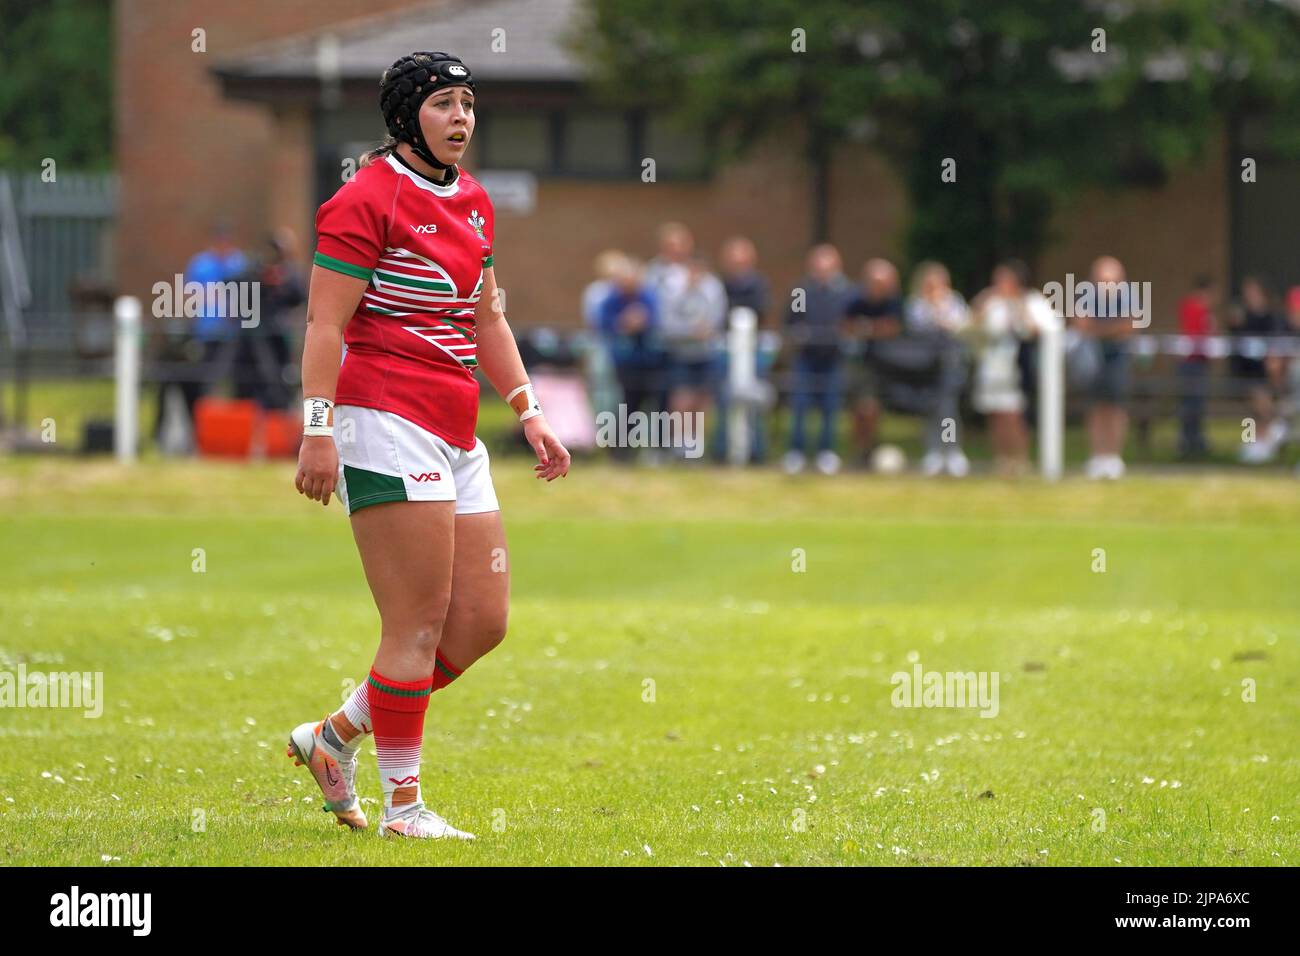 Wales Women's Rugby League / England Women Rugby League Banque D'Images